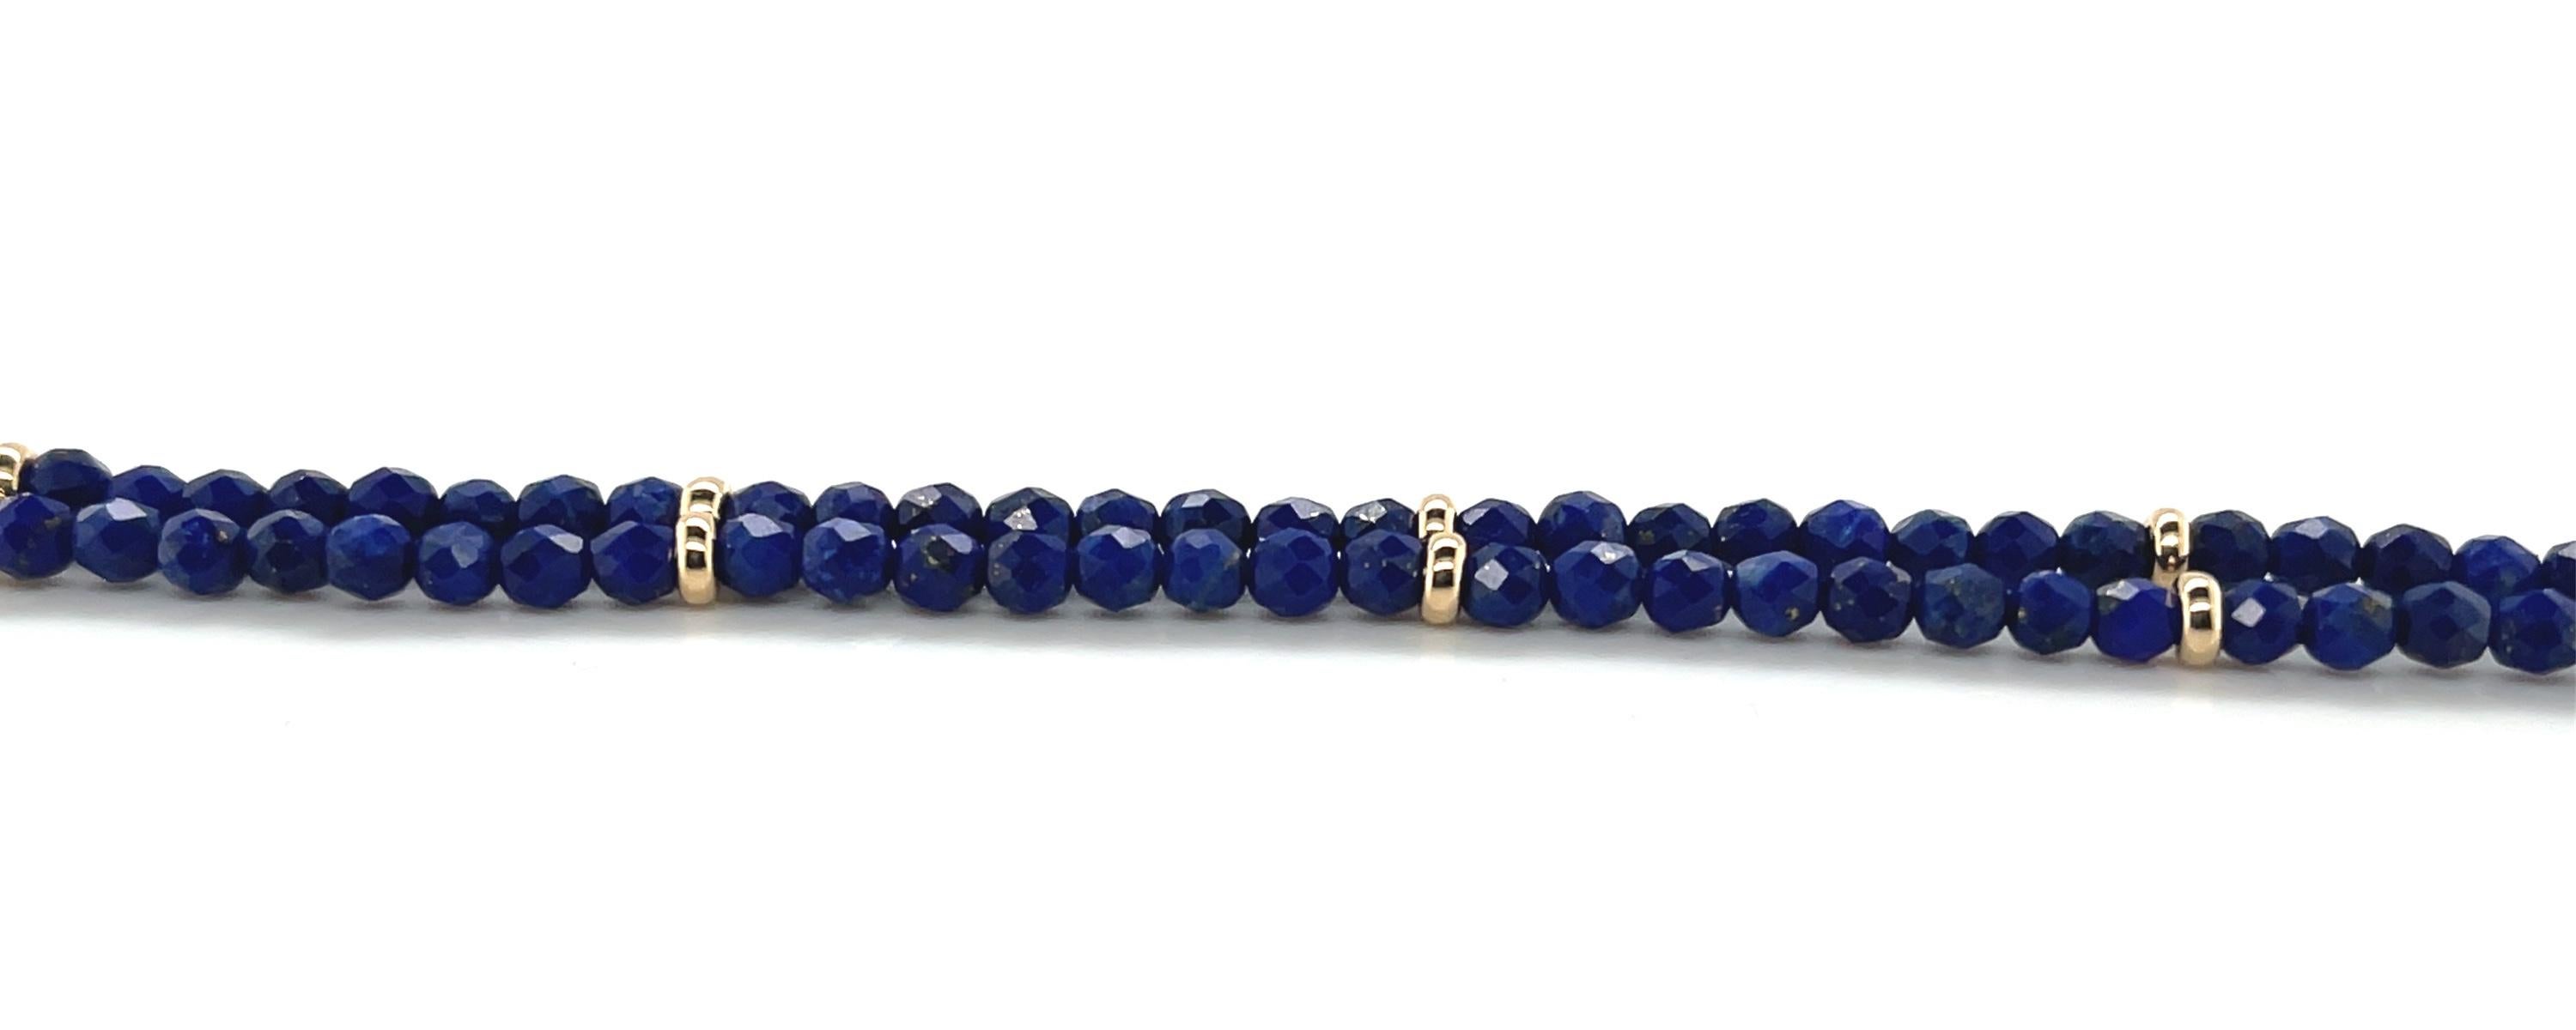 Faceted Lapis Bead Necklace with Yellow Gold Accents, 32 Inches In New Condition For Sale In Los Angeles, CA